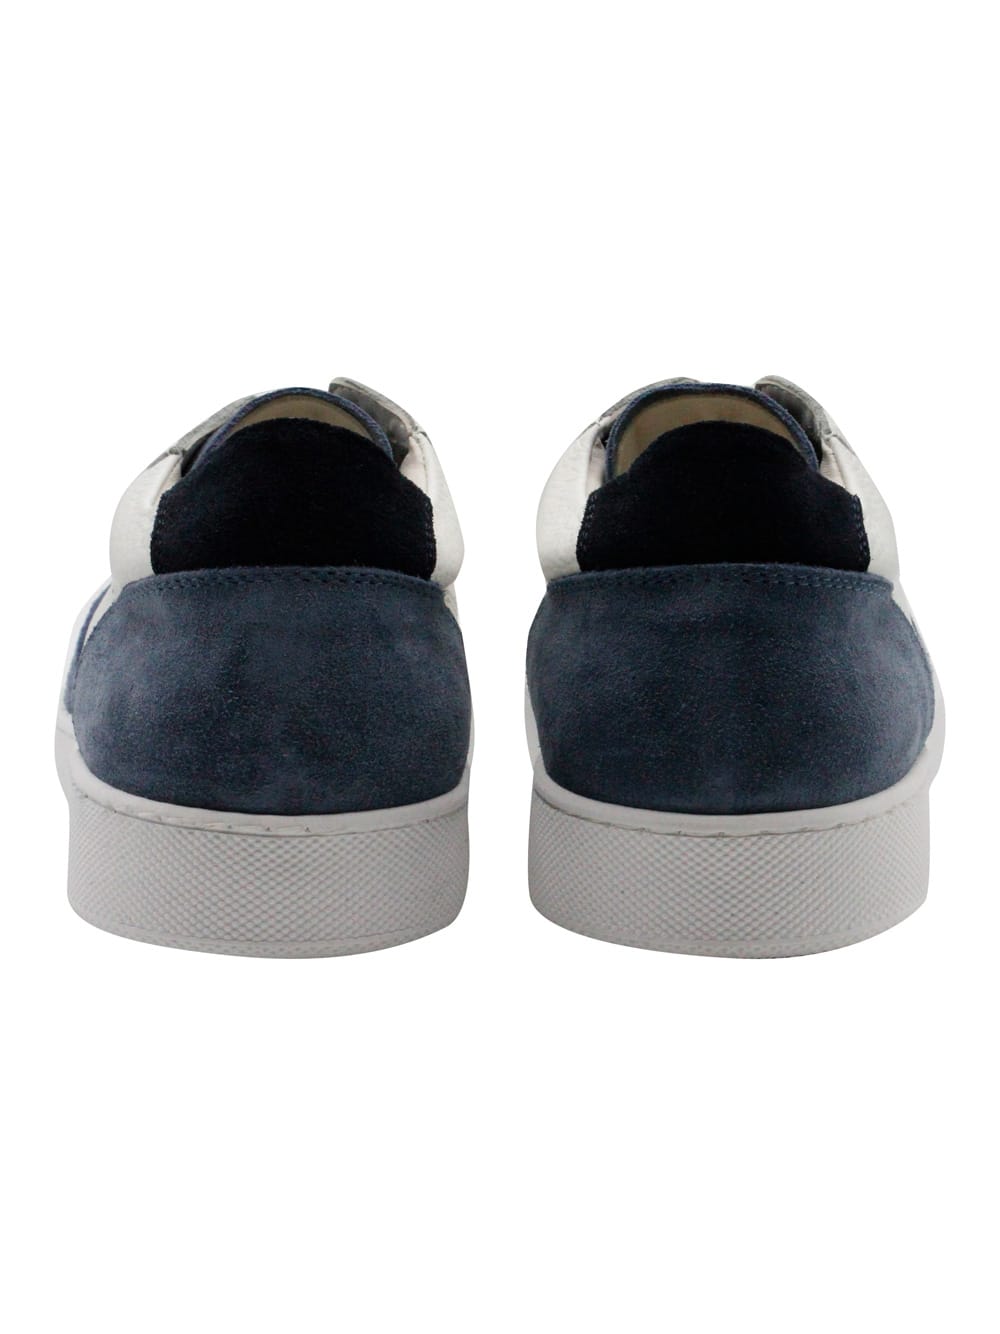 Shop Barba Napoli Sneakers In Soft And Fine Leather With Contrasting Color Suede Details With Lace Closure And Suede B In Light Blu